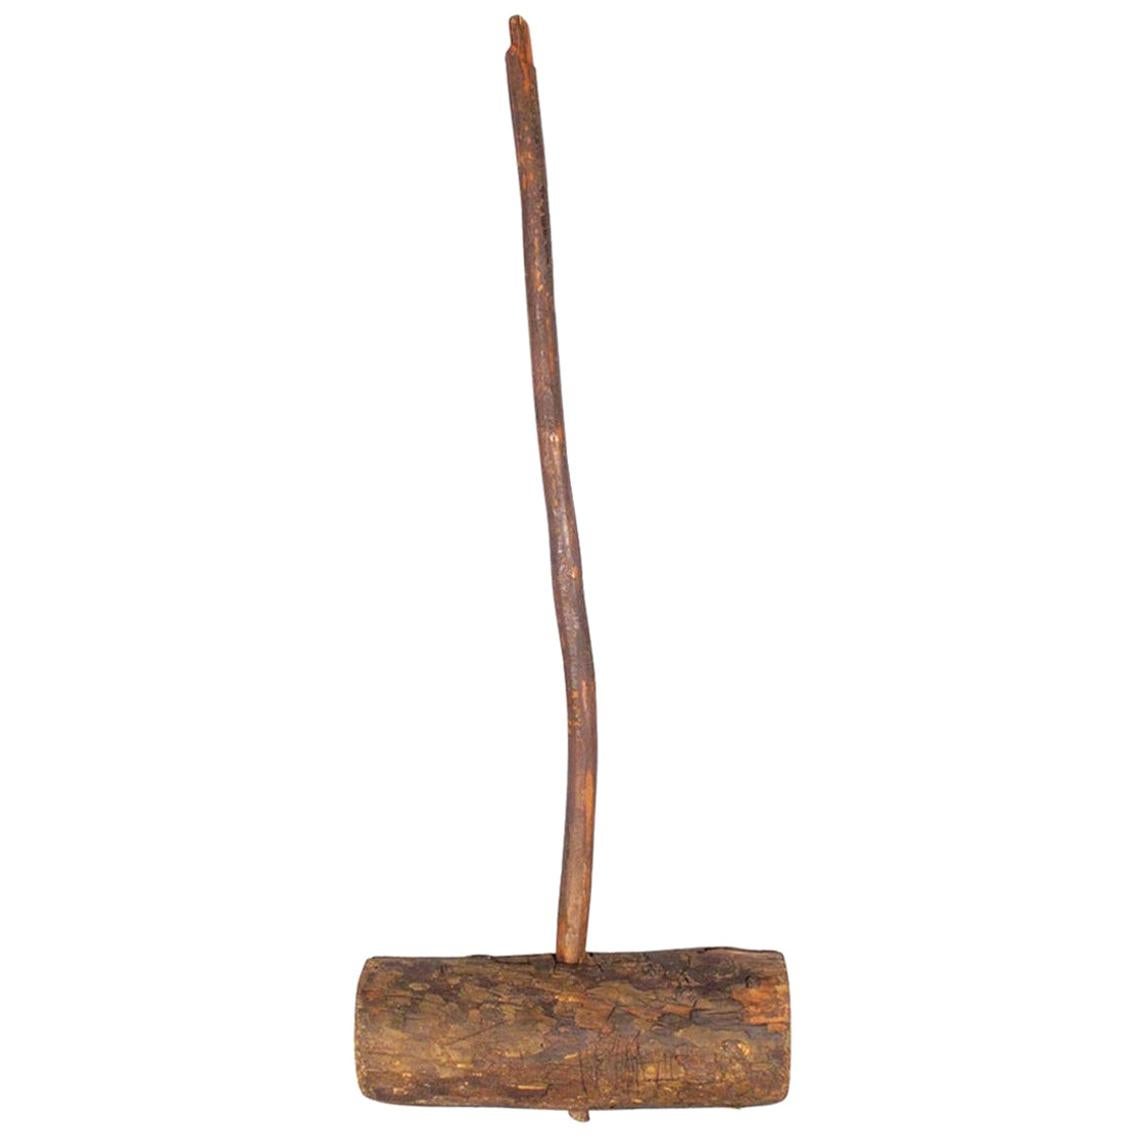 Rustic French Wooden Sledgehammer, Early 1900s